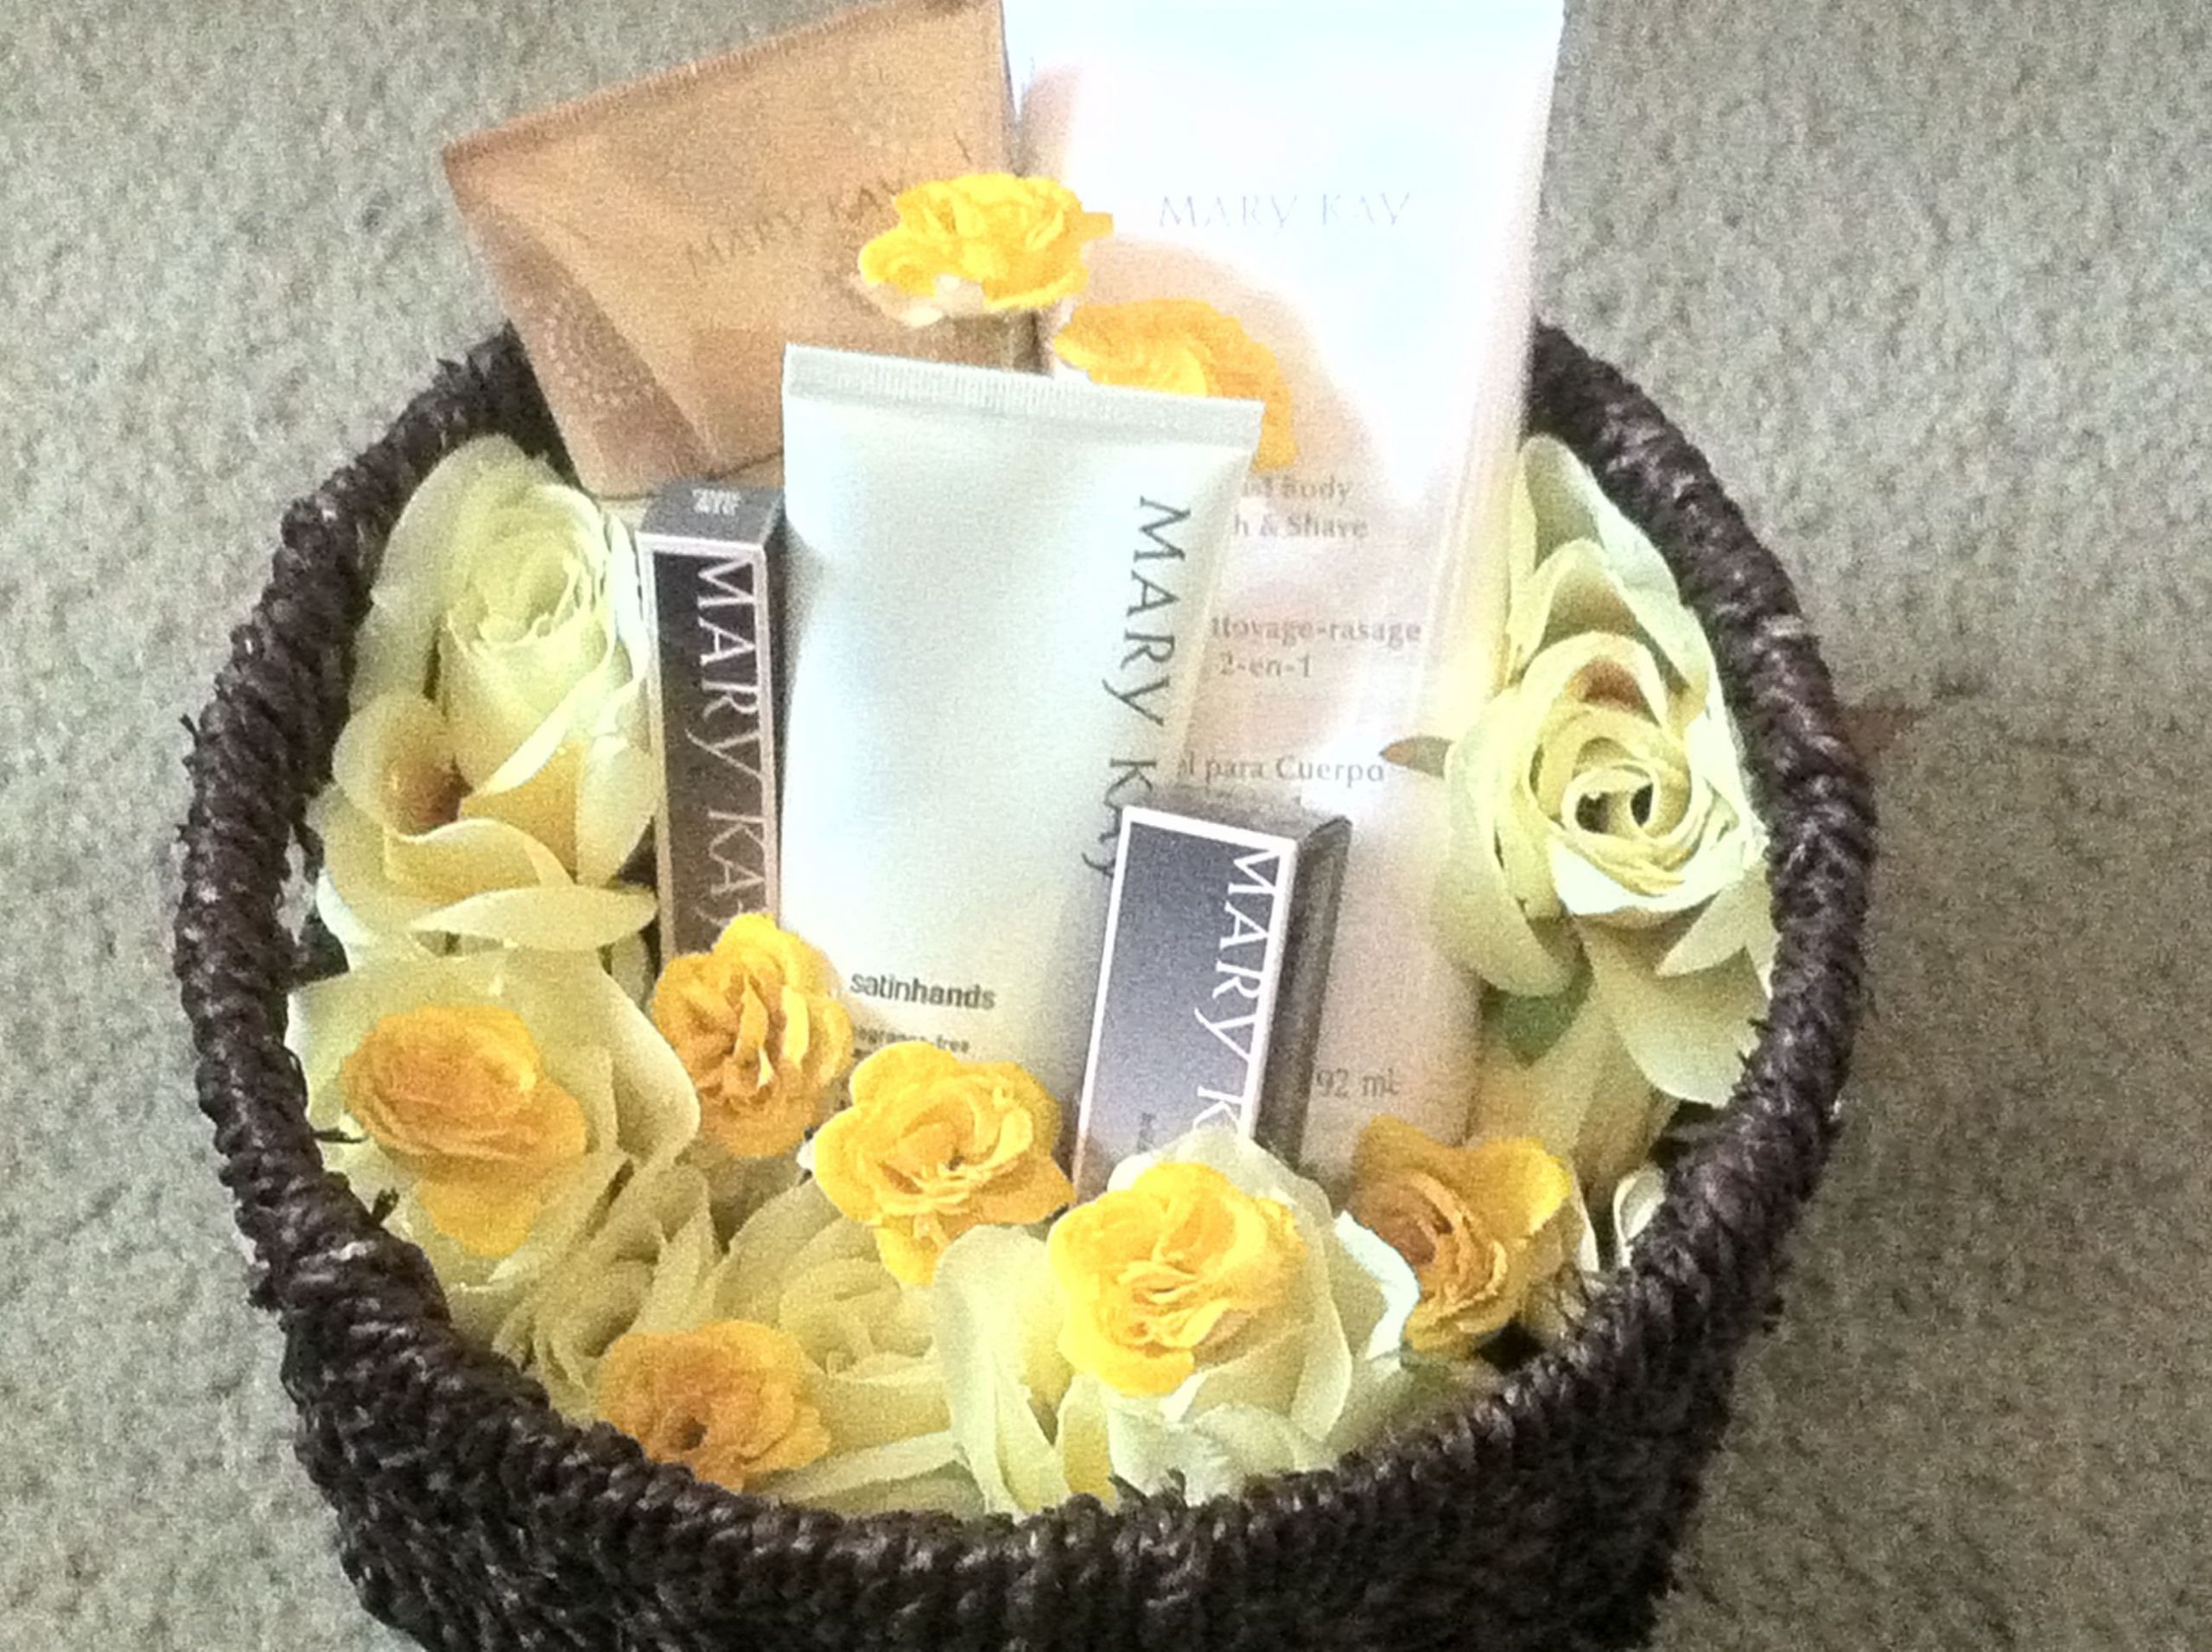 Mary Kay Gift Baskets Ideas
 This is a Mothers Day Mary Kay basket I made for a client